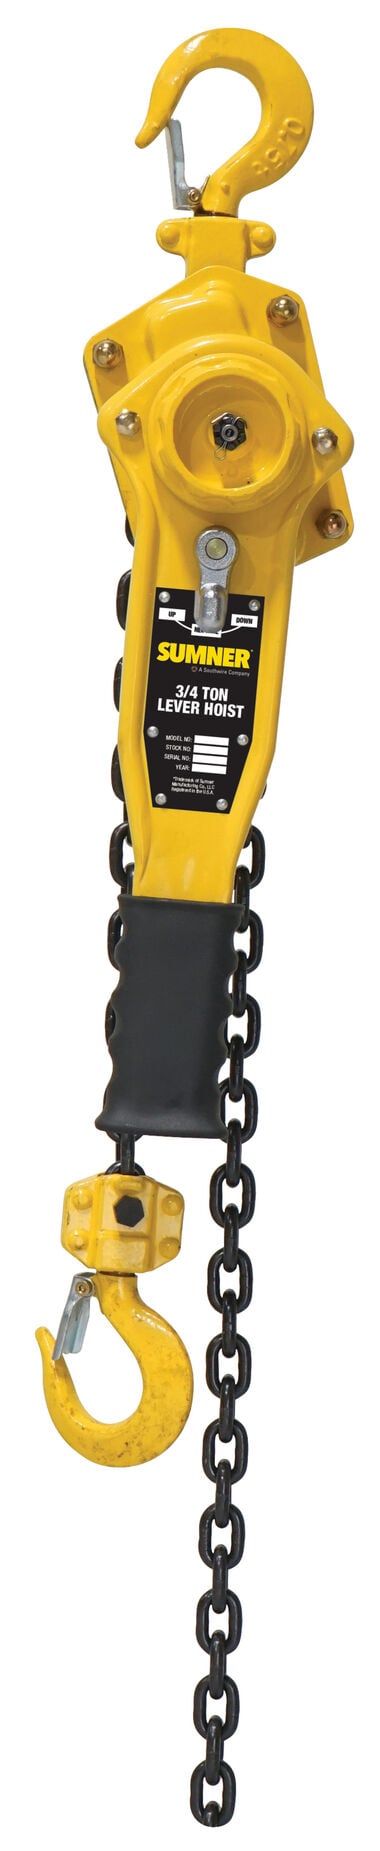 Sumner 3/4 Ton Lever Hoist with 15 ft. Chain Fall, large image number 0